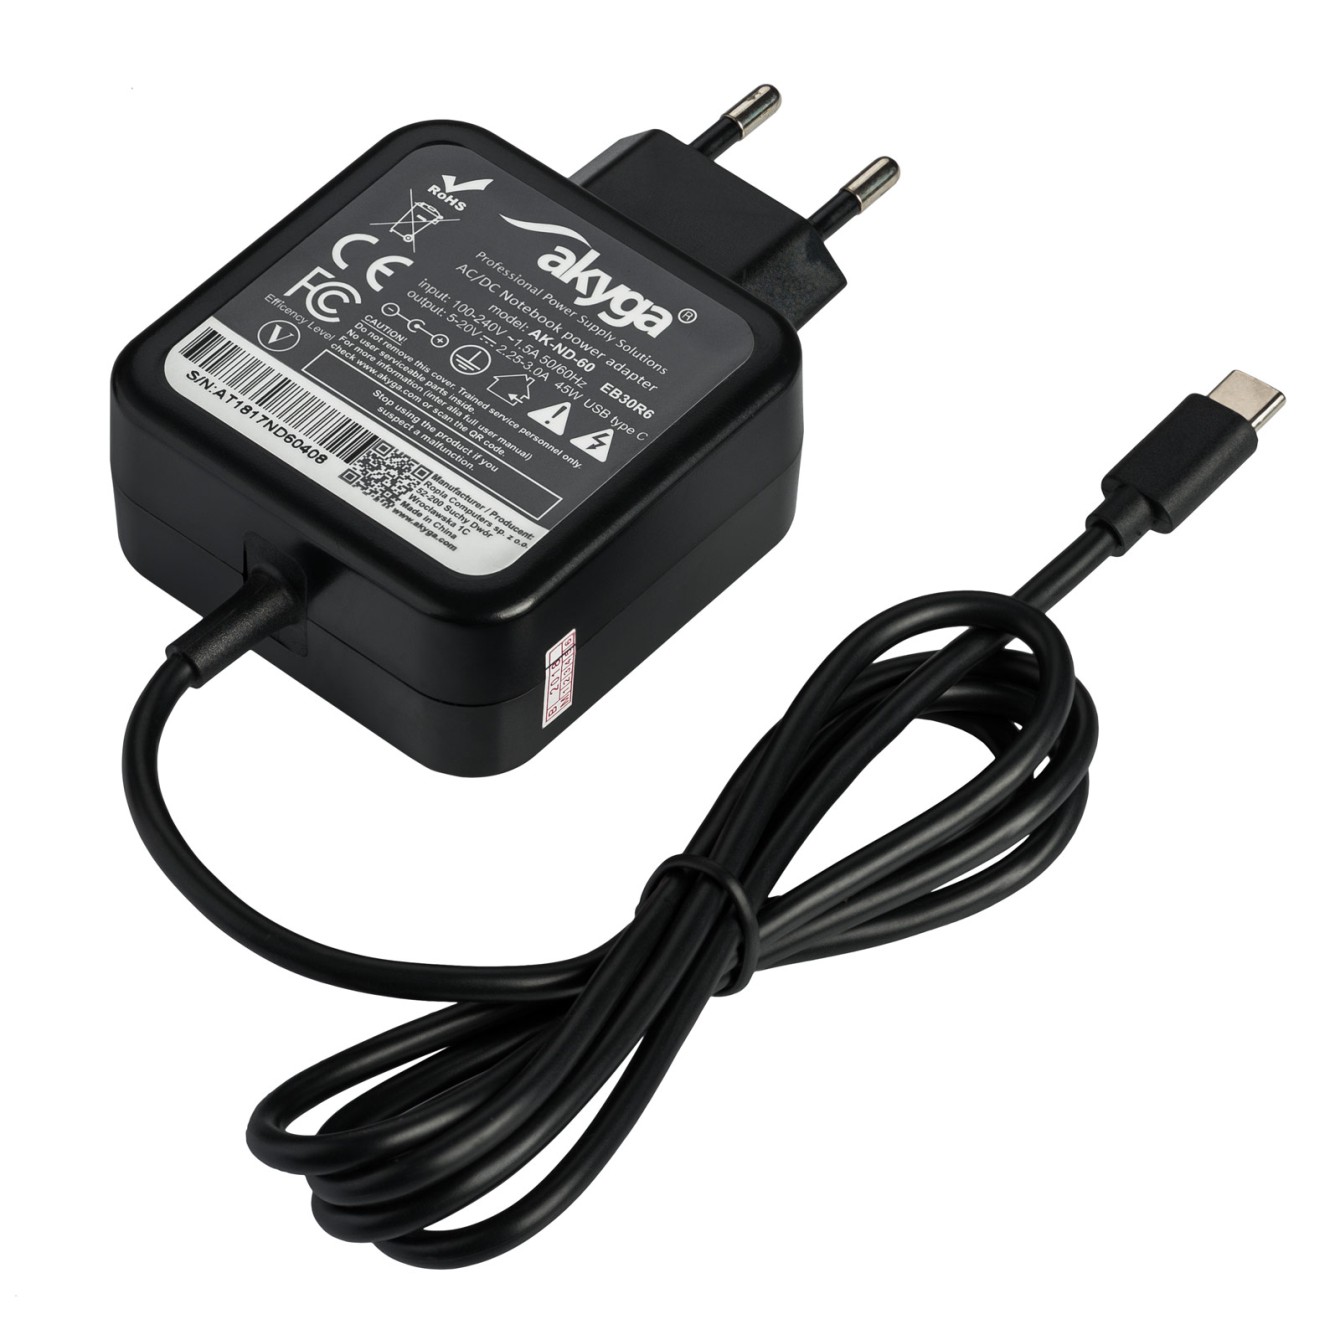 Akyga AK-ND-60 laptop charger with a USB type C plug